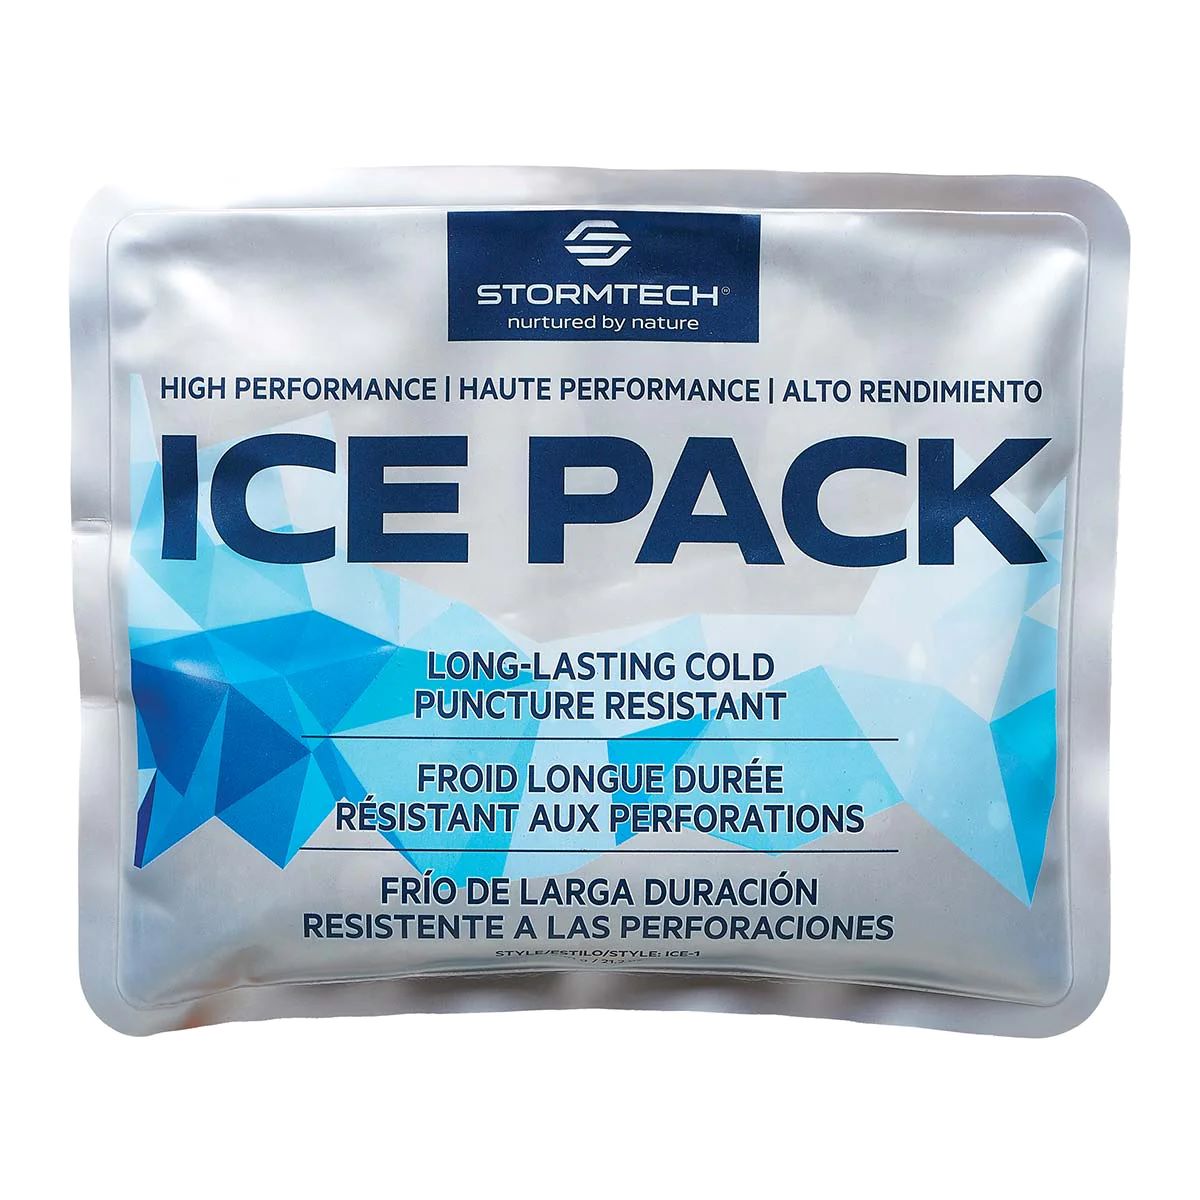 How To Store Ice Packs